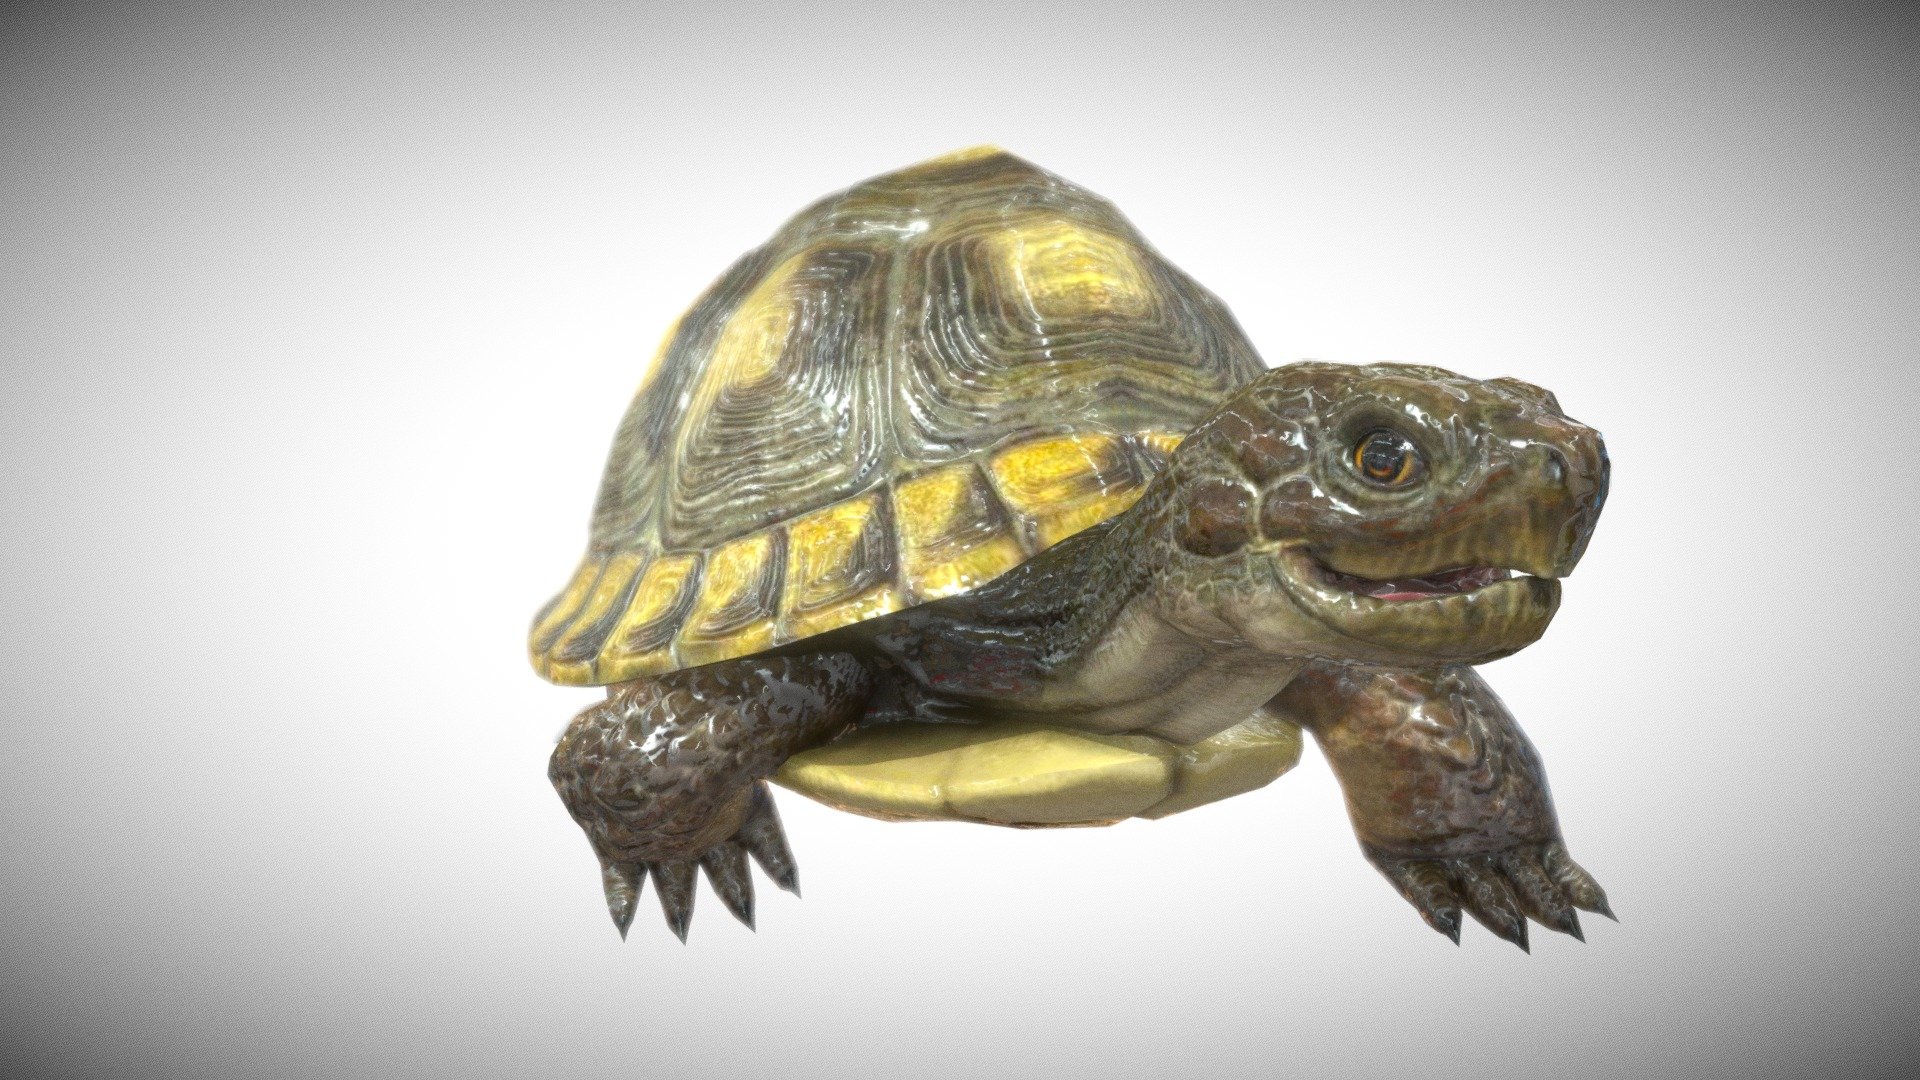 Hunting Gameready character , related animations: Walk (2 types), Idle (3 types), Attack (2 types), Die (4 types), Run (2 types), other actions (6 types) - Turtle - 3D model by ElectroNick 3d model